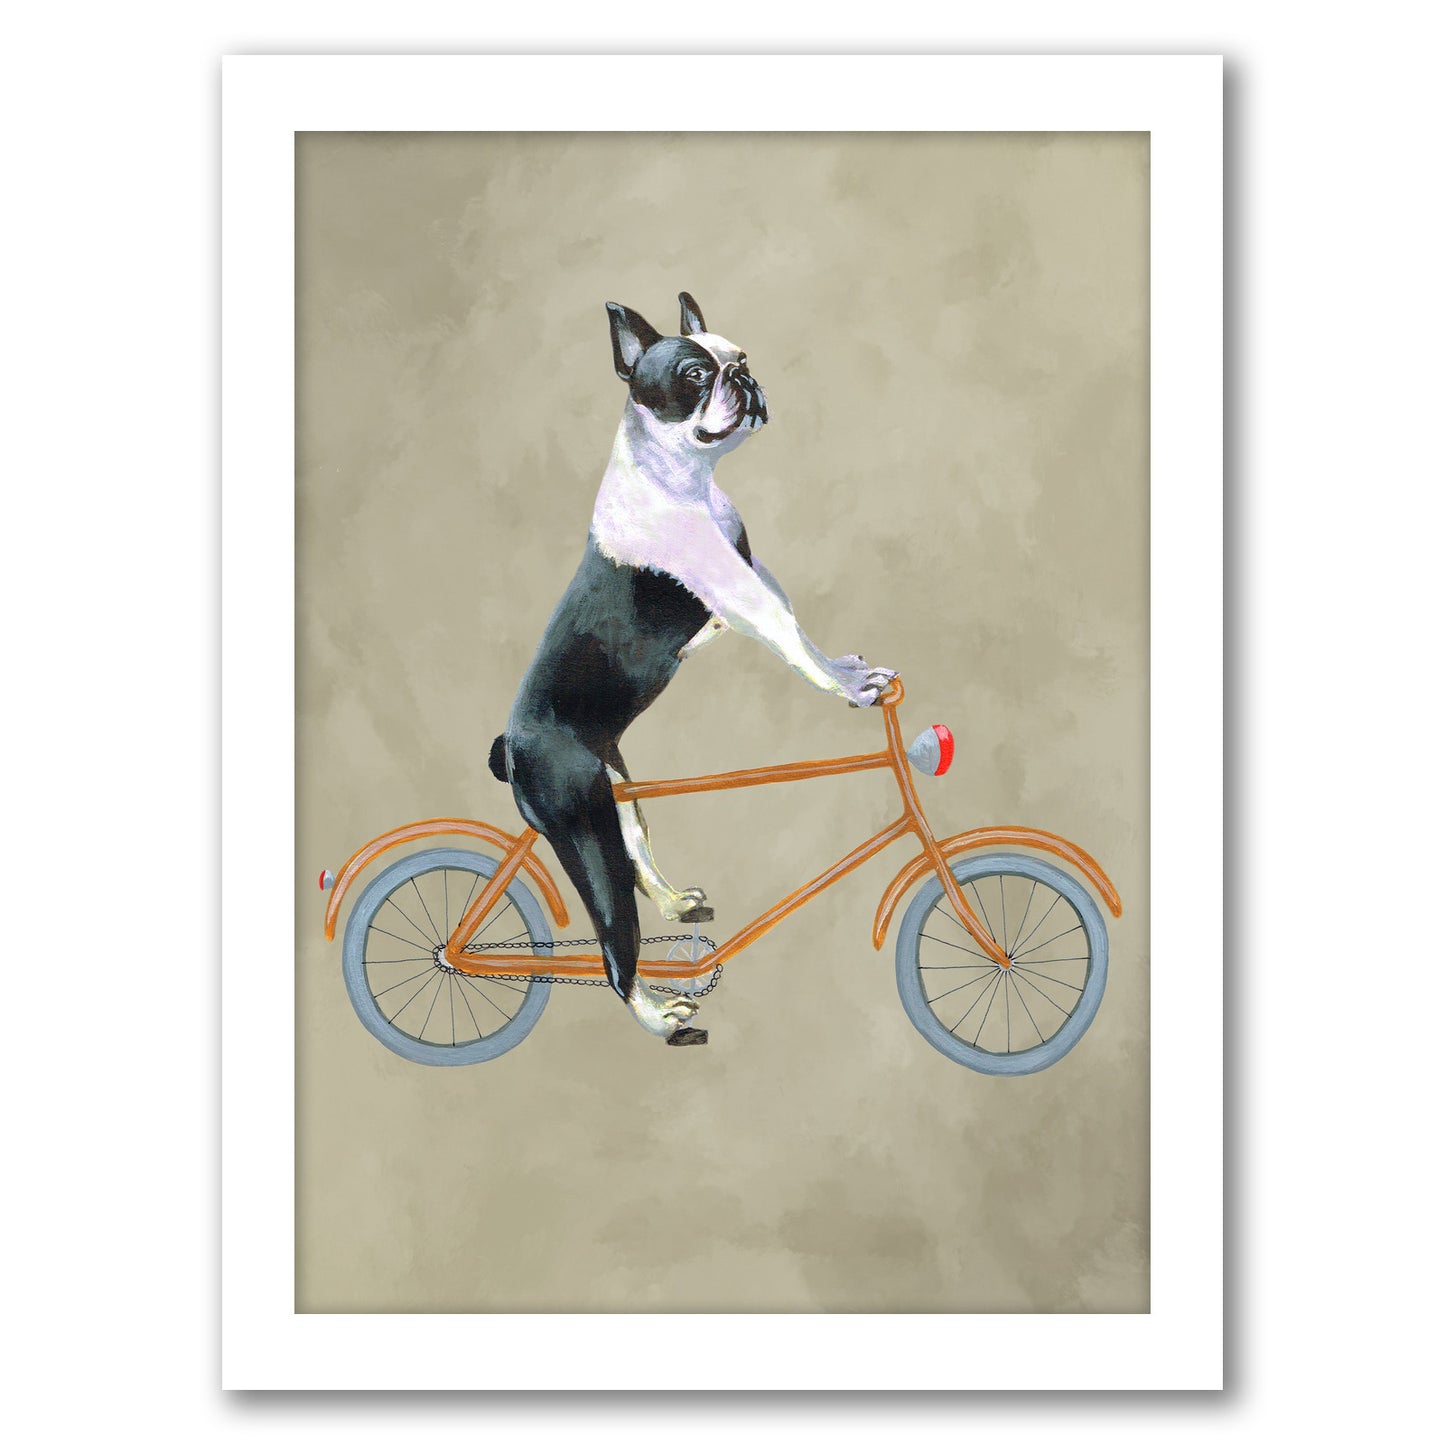 Boston Terrier On Bicycle By Coco De Paris - Framed Print